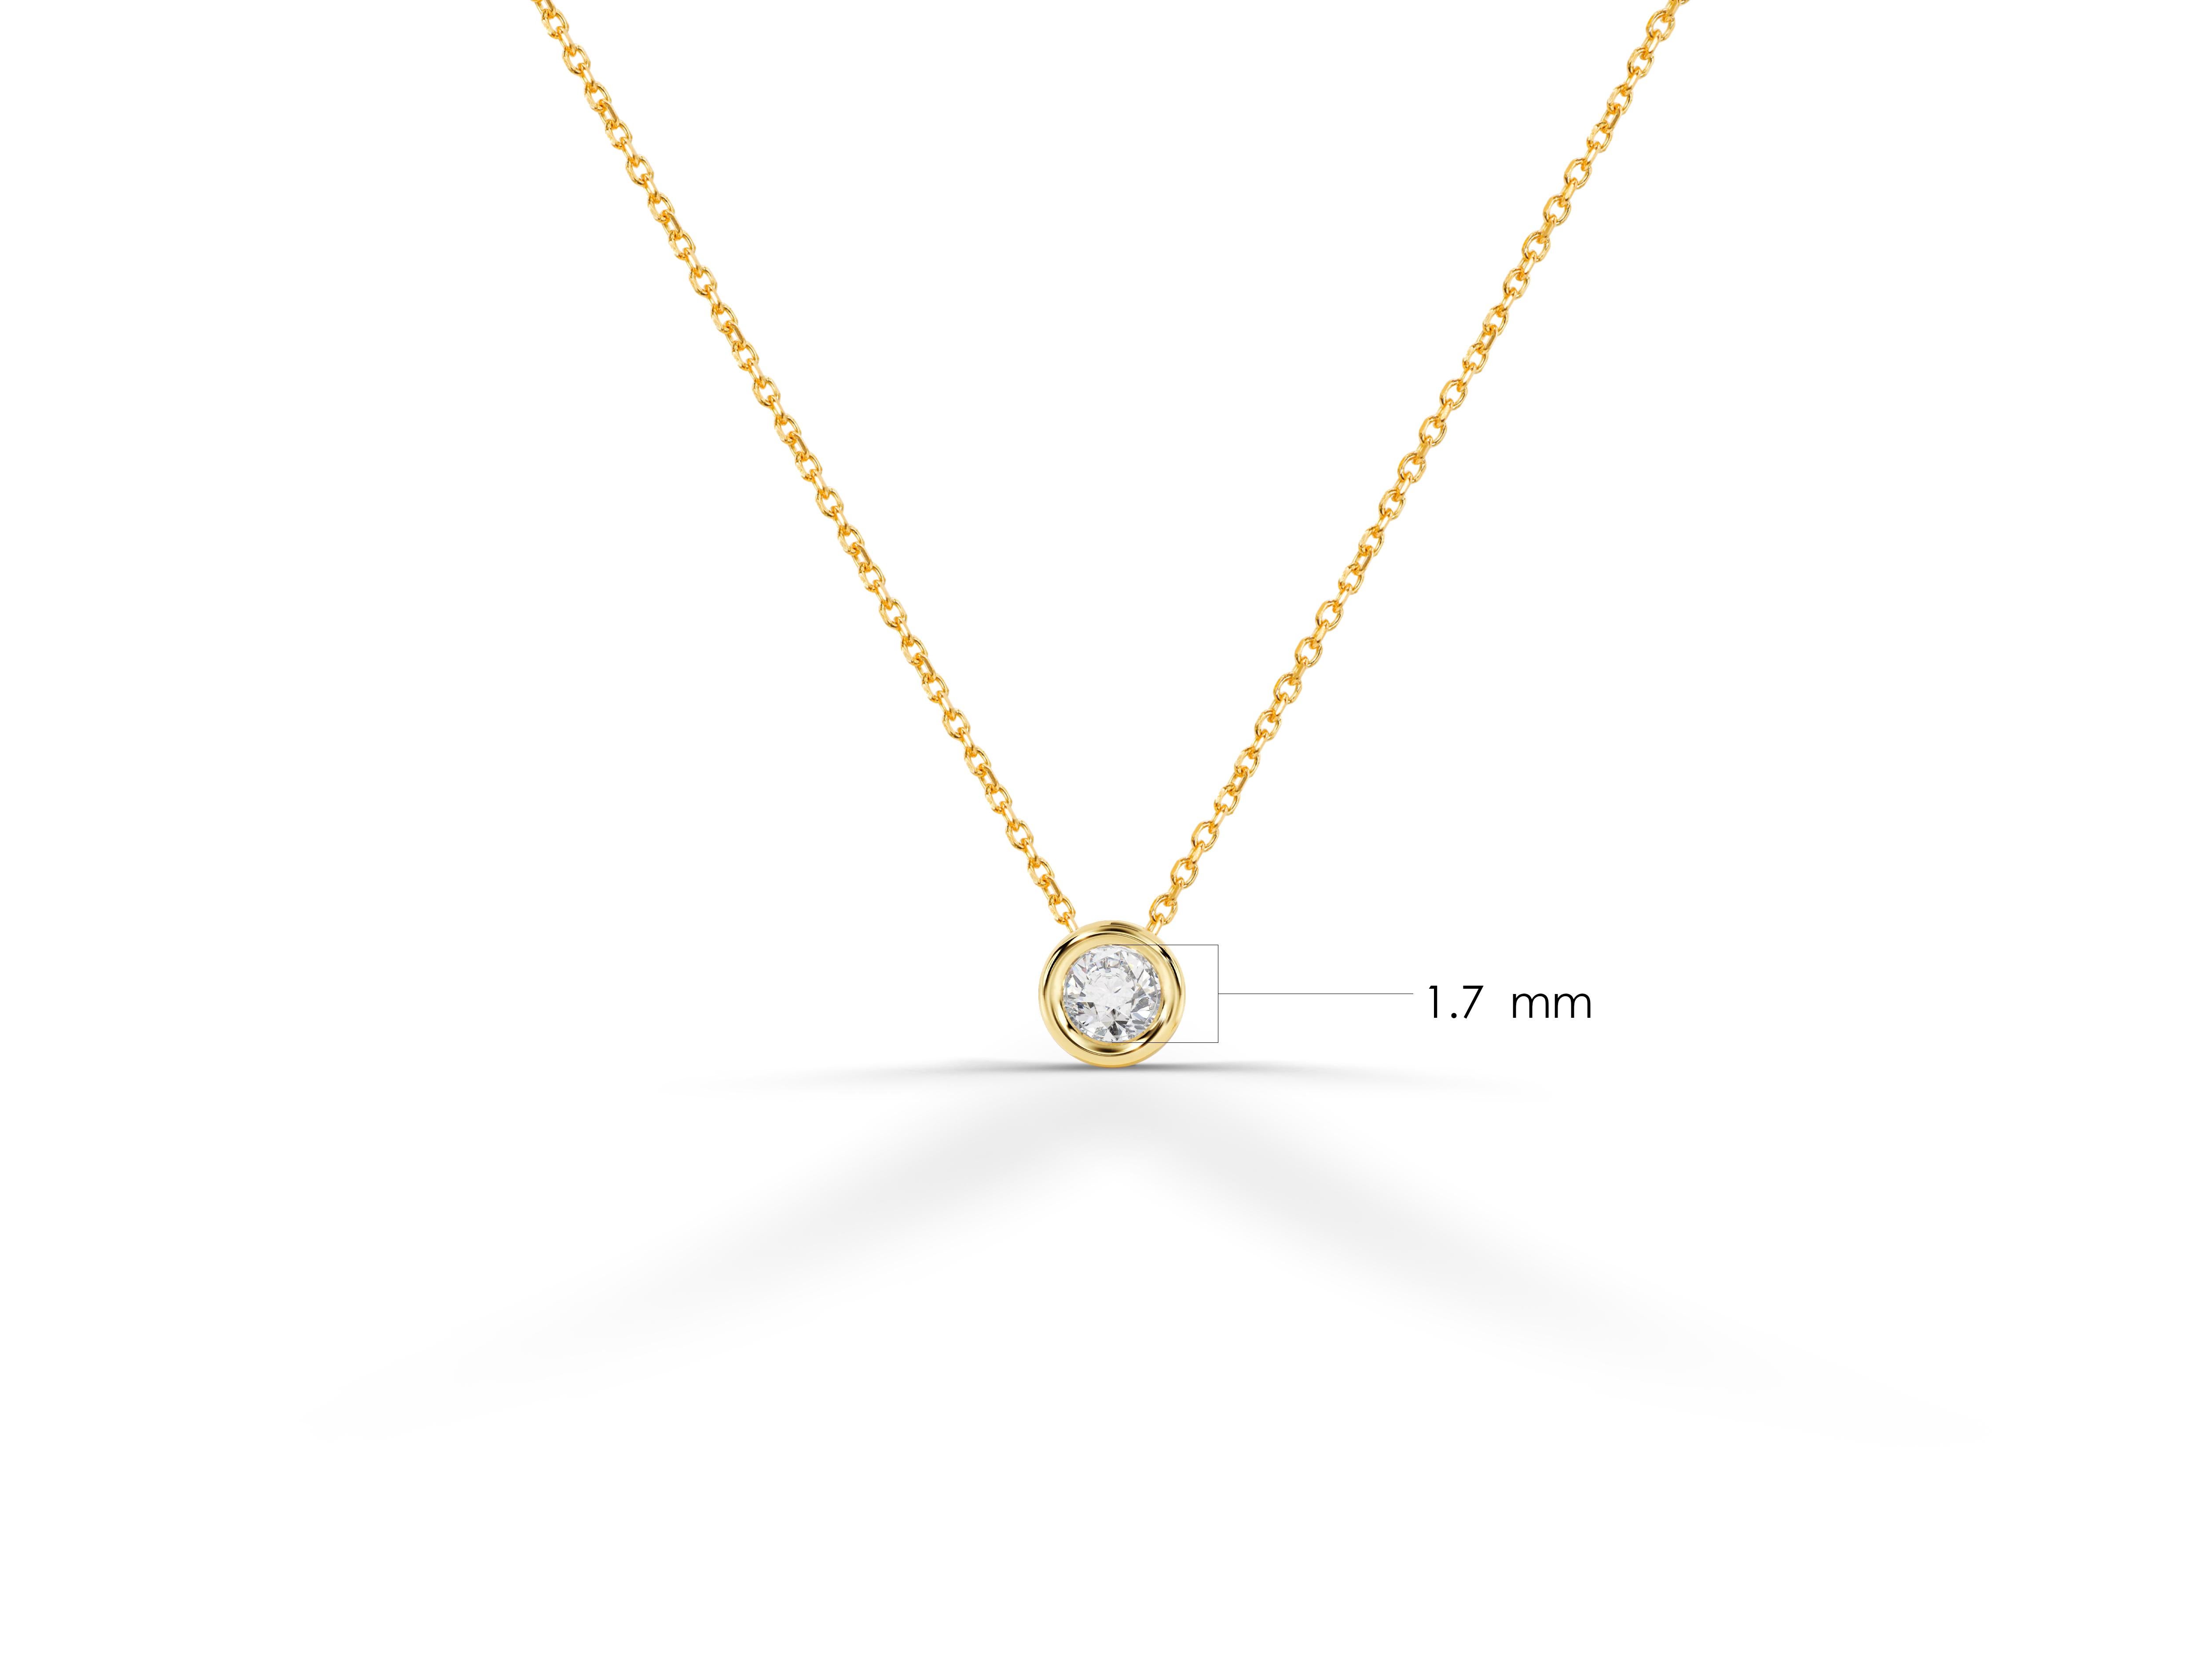 Delicate Minimal Necklace made of 18k solid gold available in three colors of gold, Yellow Gold / White Gold / Rose Gold.

Brilliant White Sparkly Natural Diamond Bezel hanging in center of a thin dainty gold chain a perfect choice for everyday